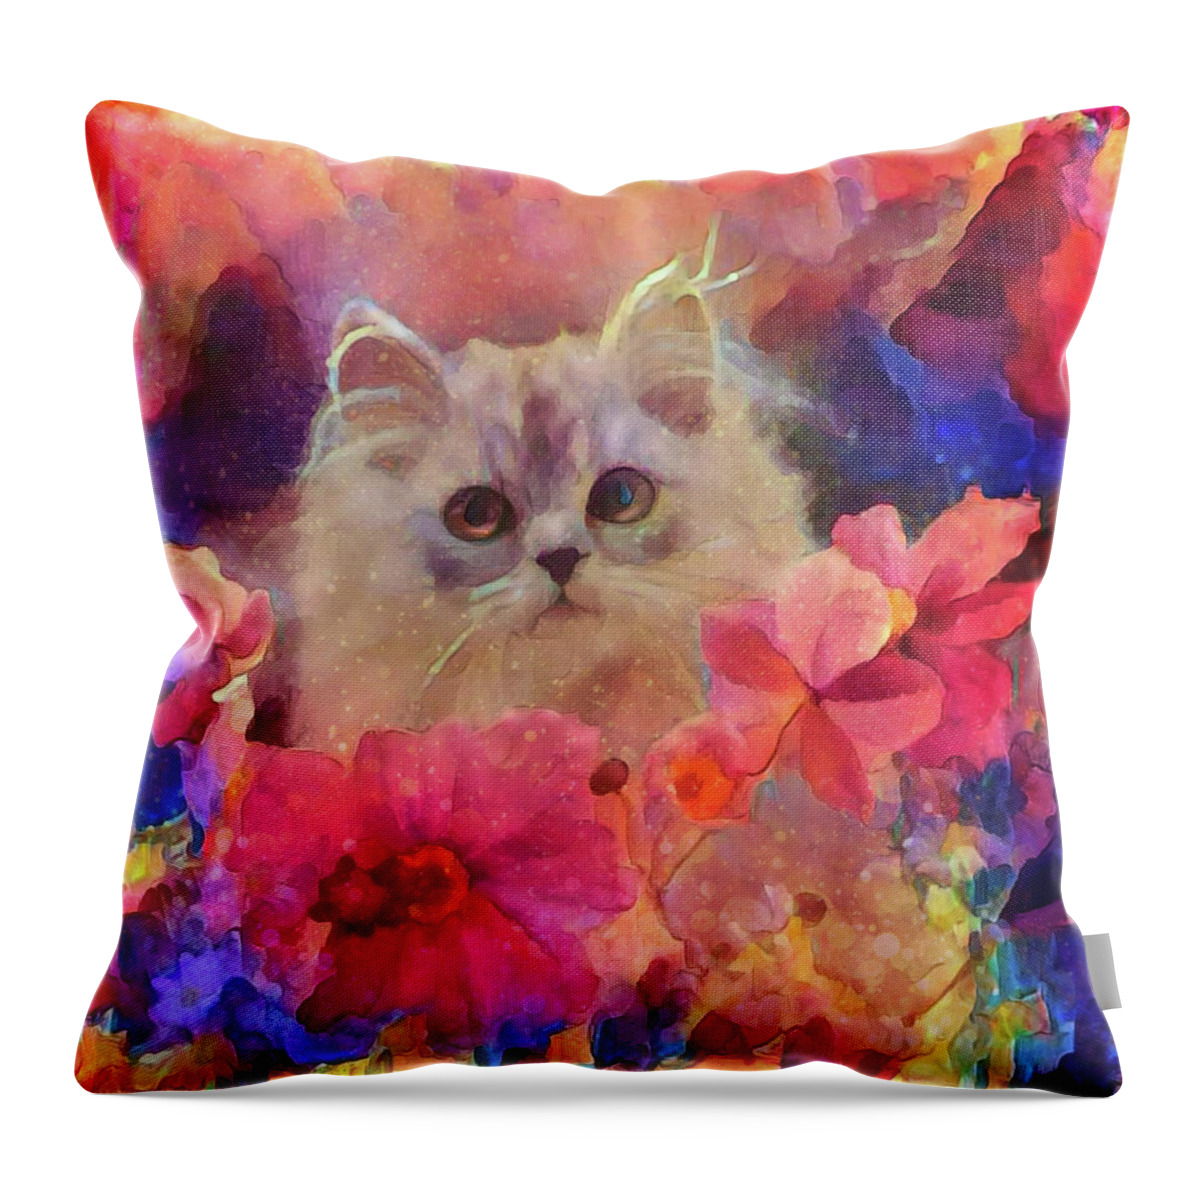 Flowery Kitty Throw Pillow featuring the mixed media Flowery Kitty by Lilia S